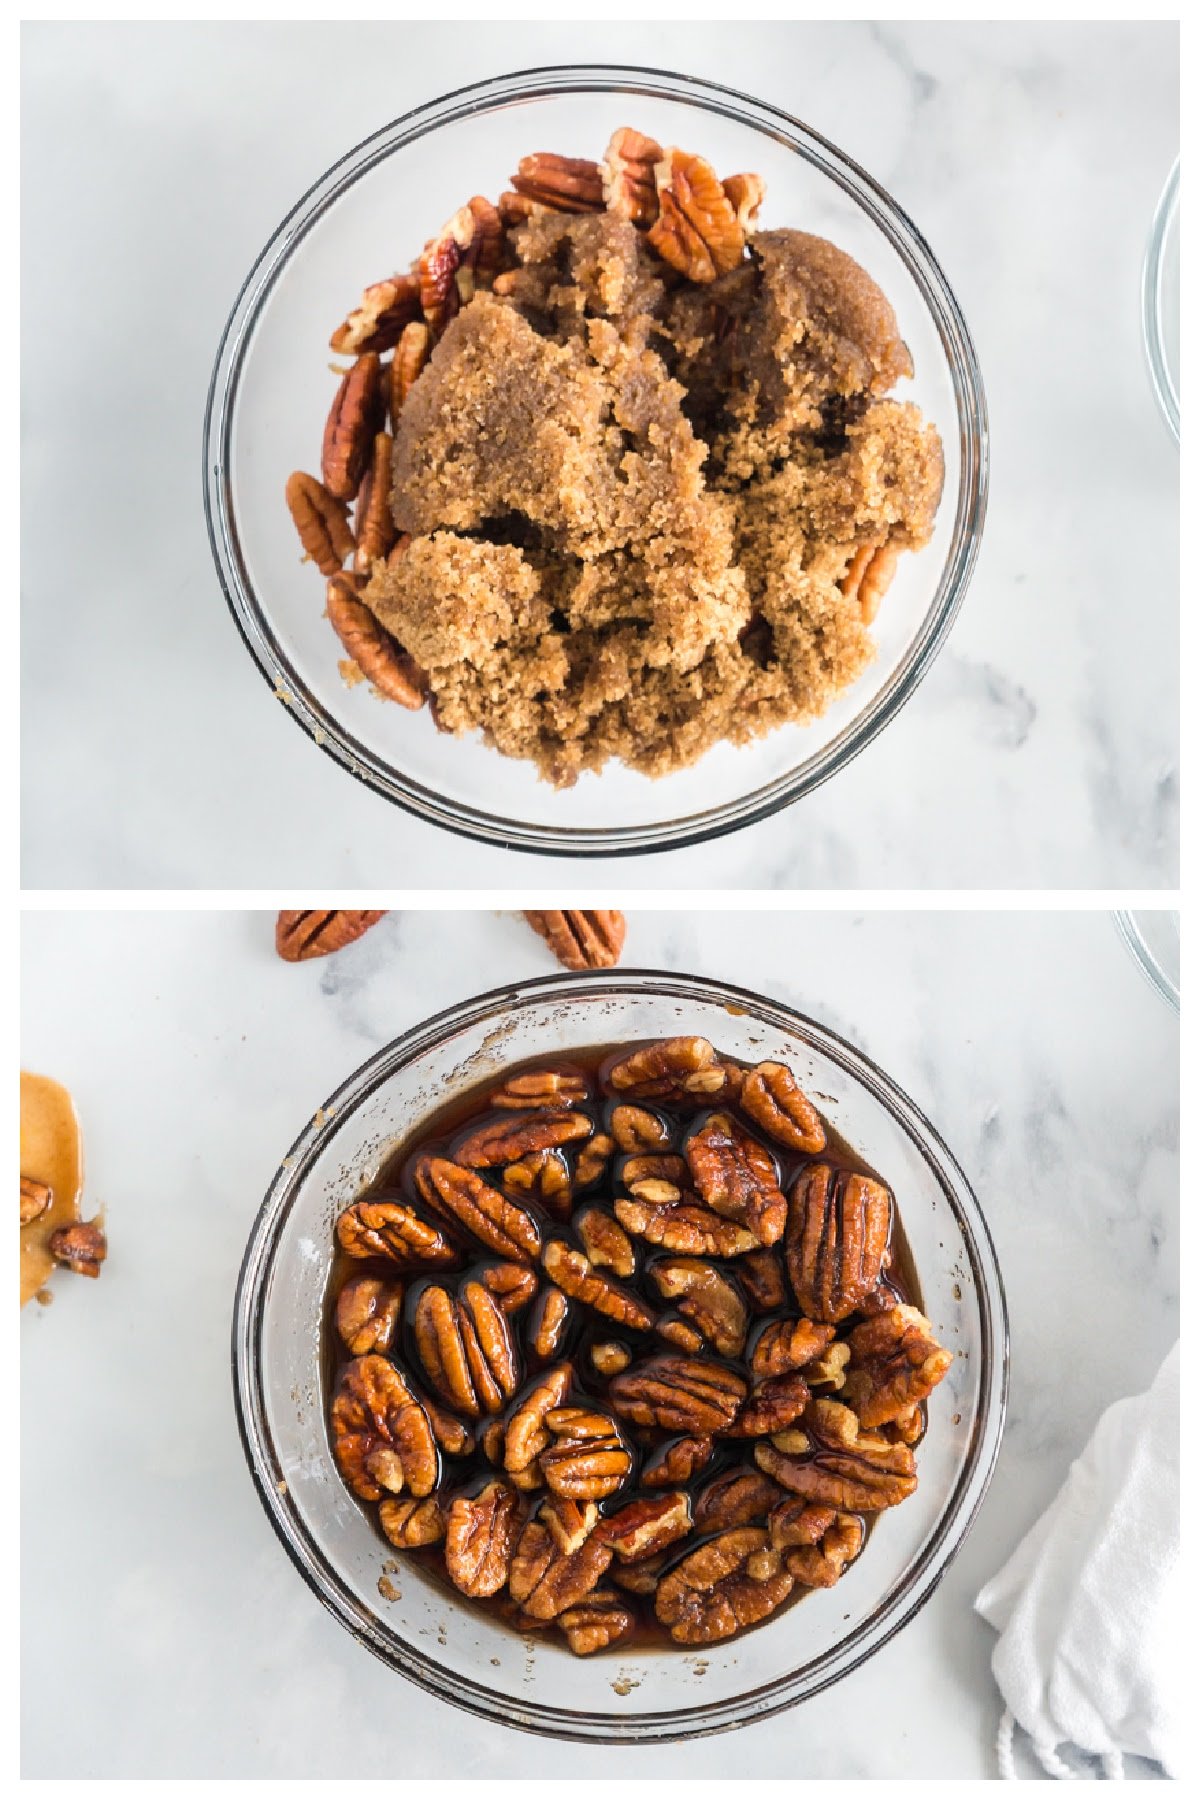 Combining the brown sugar, pecans, and brandy in a glass mixing bowl.